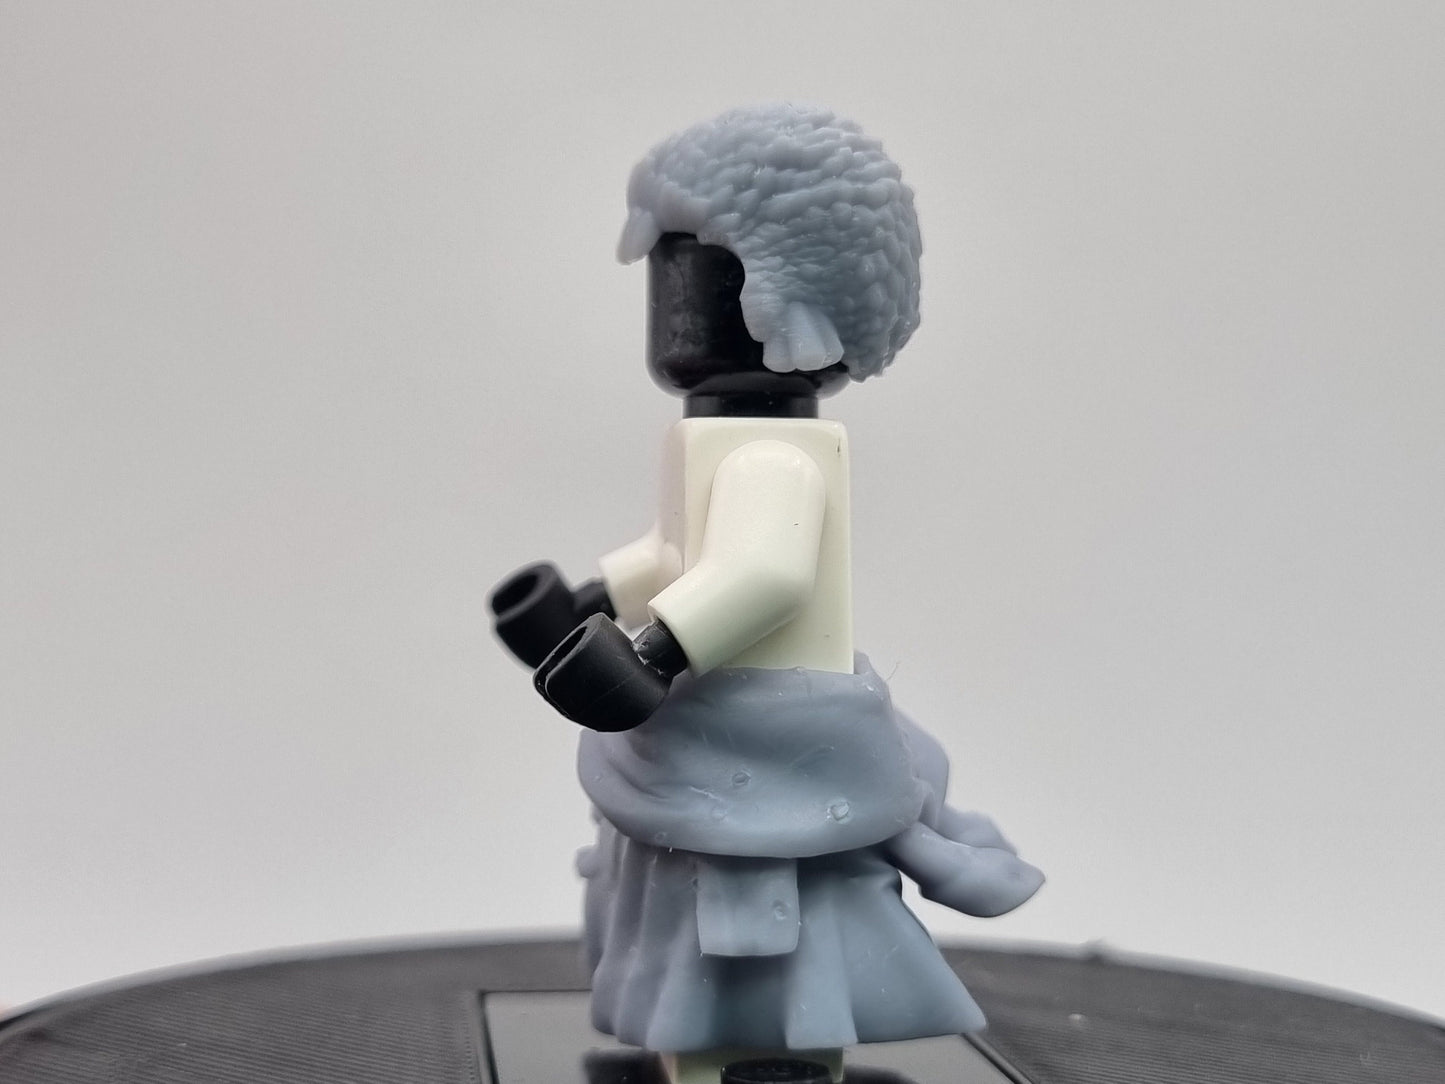 Building toy custom 3D printed 3 sword prirate hairpieces and cloak!